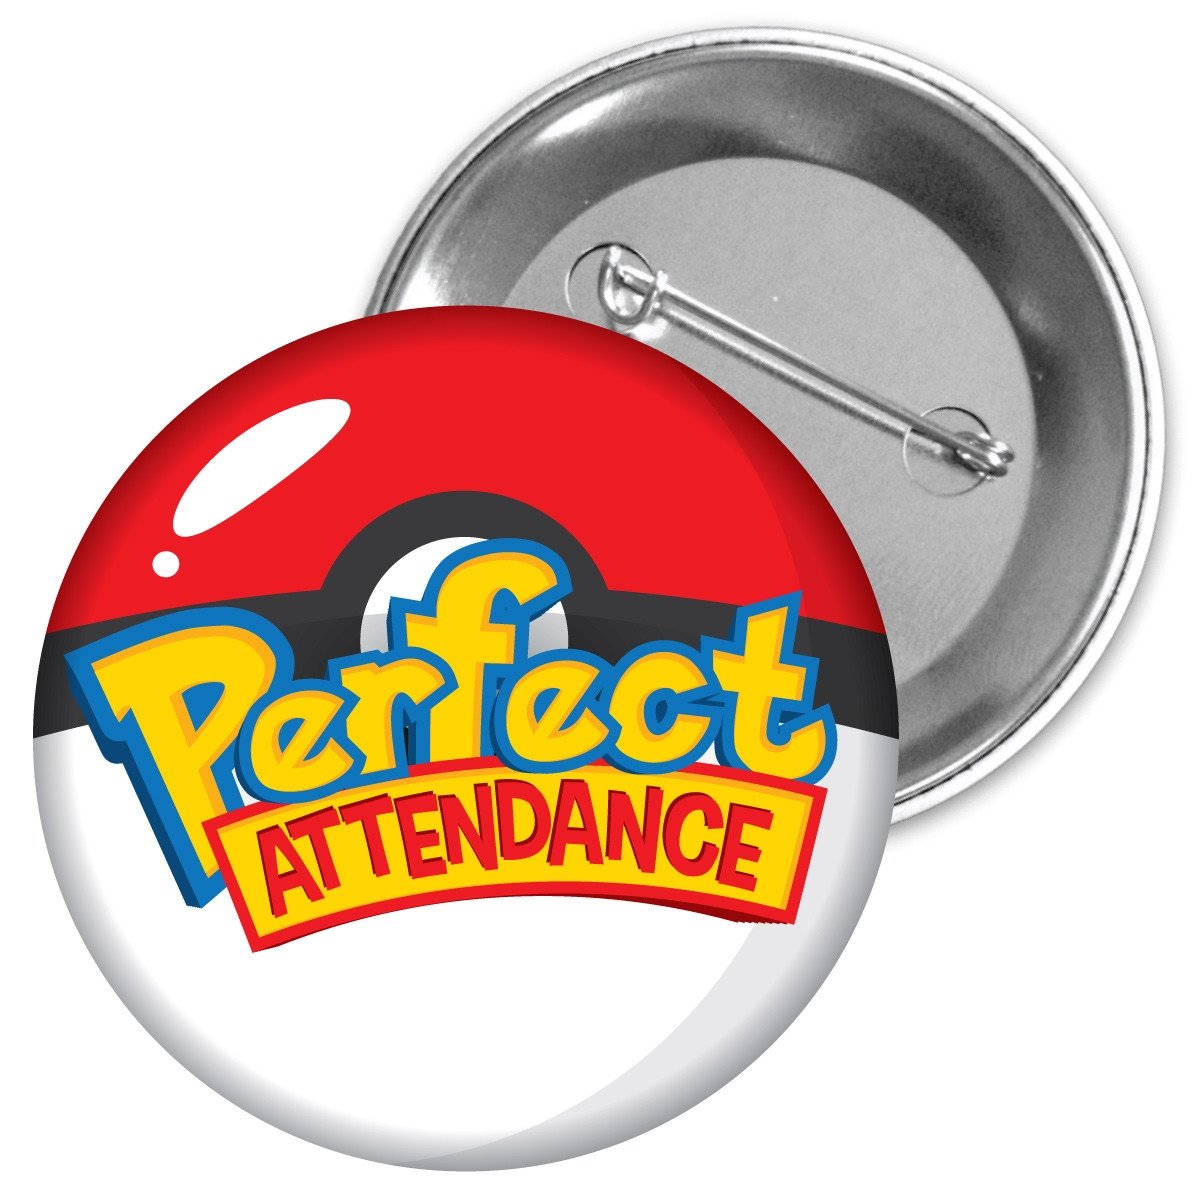 Metal Button - Perfect Attendance (Pocket Ball Monsters Theme)